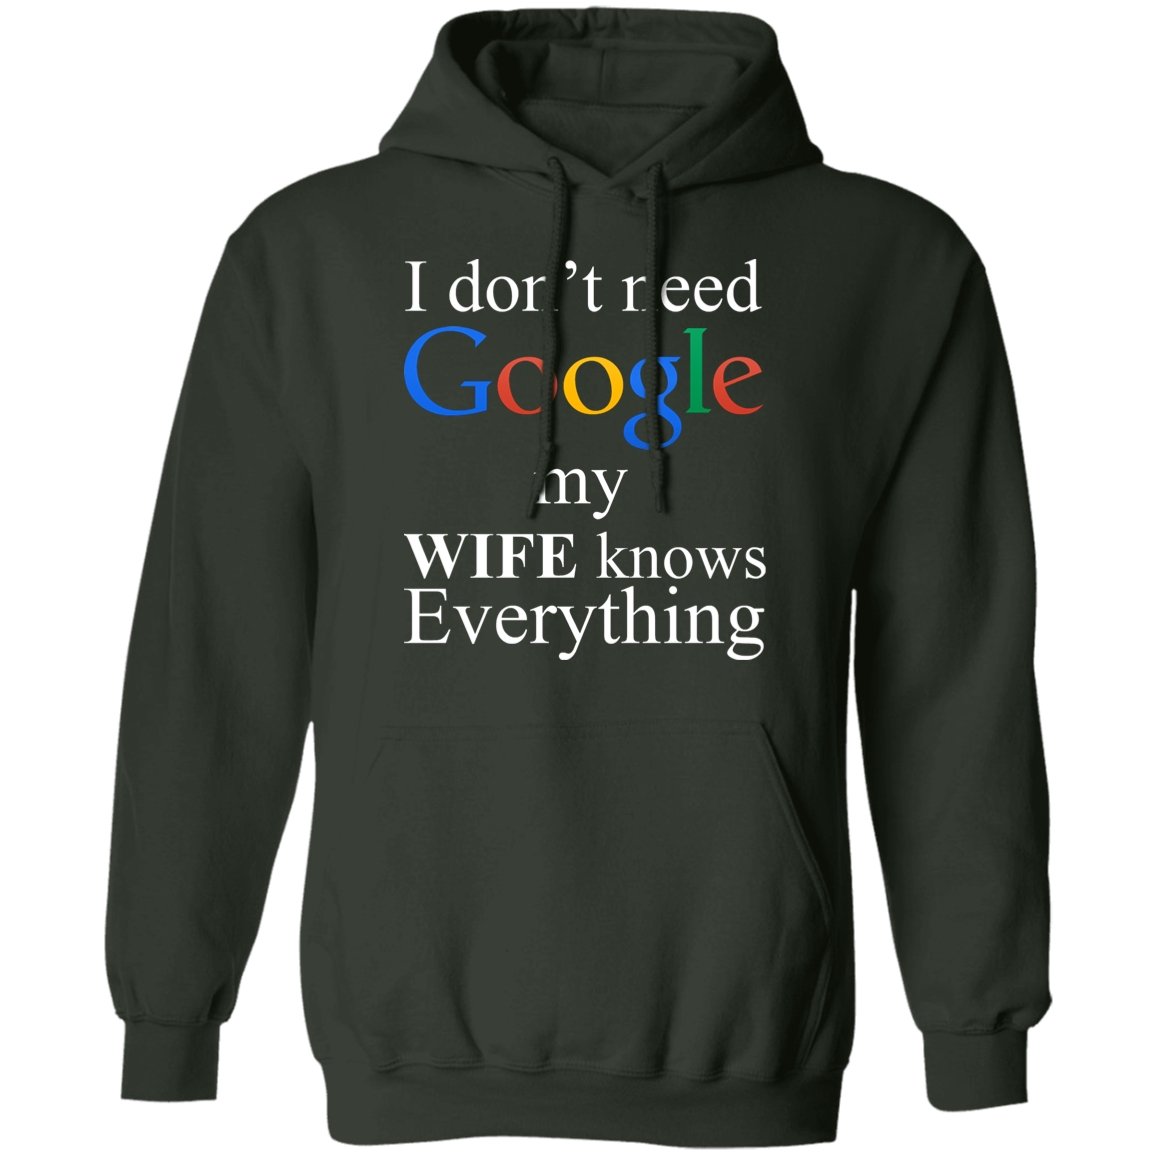 I Don't Need Google My Wife Knows Everything Apparel | Apparel | american apparel usa tshirt, American Greatness, american made, american shirt, american shirts, christmas gifts, gift for dad, gifts, gifts for christmas, gifts for men, google, google hoodie, google shirt, google sweatshirt, google tank top, made in usa, shirt, sweatshirt, sweatshirts, usa, usa apparel, usa made | TageUnlimited